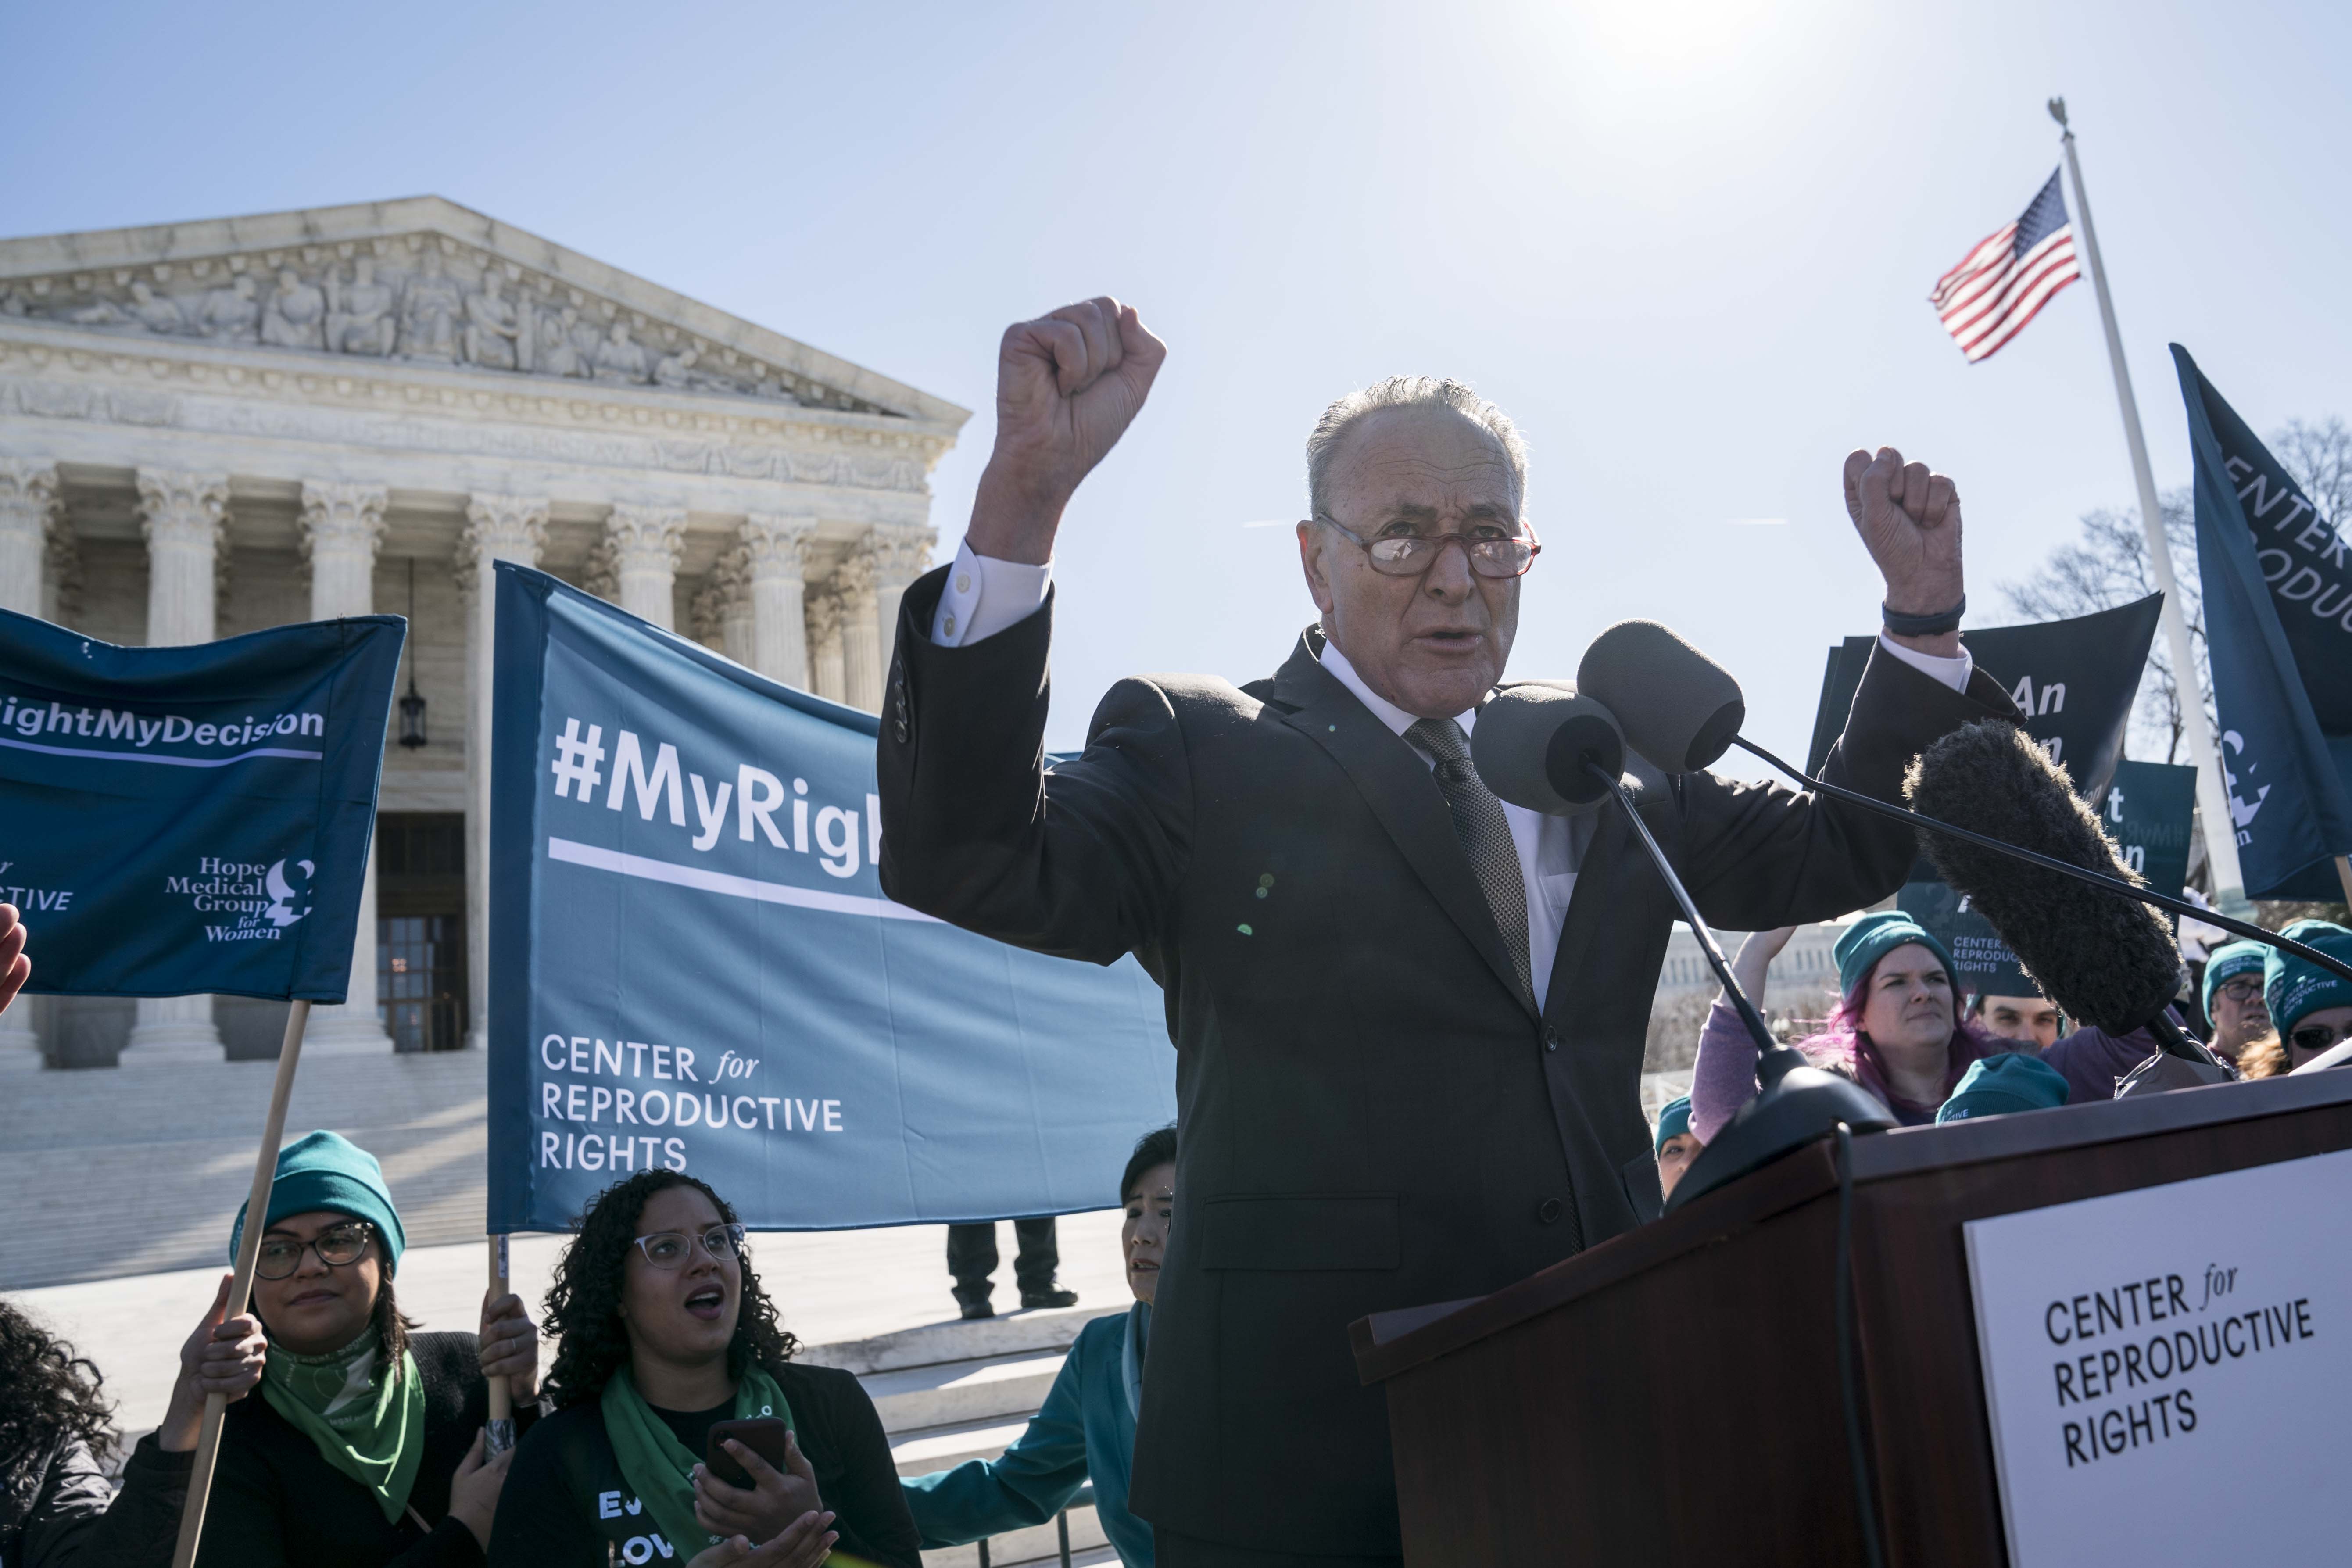 WASHINGTON, DC - MARCH 04: Senate Minority Leader Sen. Chuck Schumer (D-NY) speaks in an abortion rights rally outside of the Supreme Court as the justices hear oral arguments in the June Medical Services v. Russo case on March 4, 2020 in Washington, DC. The Louisiana abortion case is the first major abortion case to make it to the Supreme Court since Donald Trump became President. (Photo by Sarah Silbiger/Getty Images)